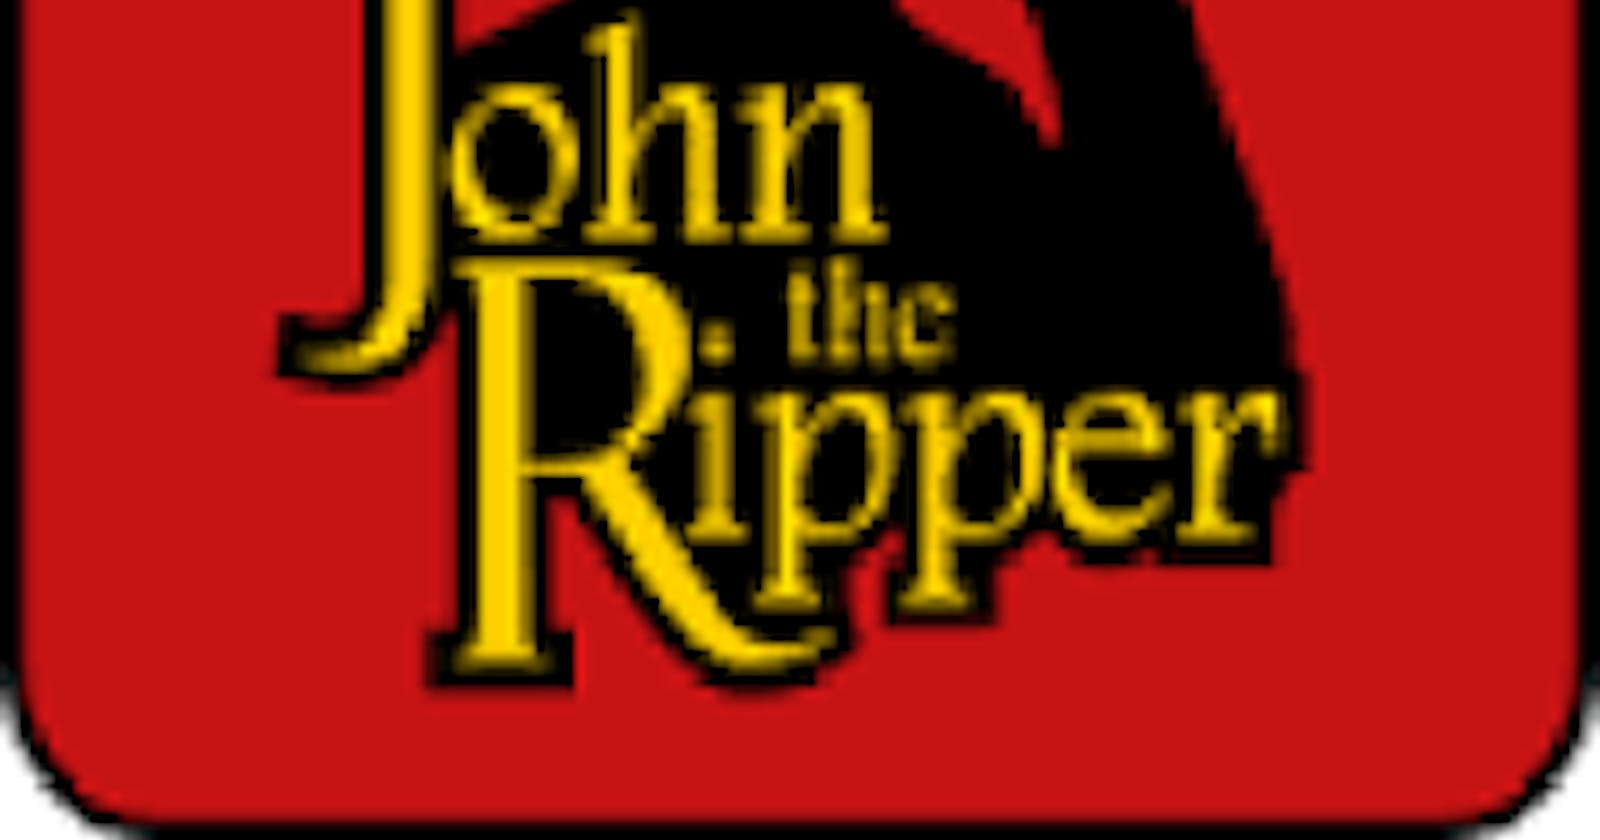 How to crack hashes with John the Ripper